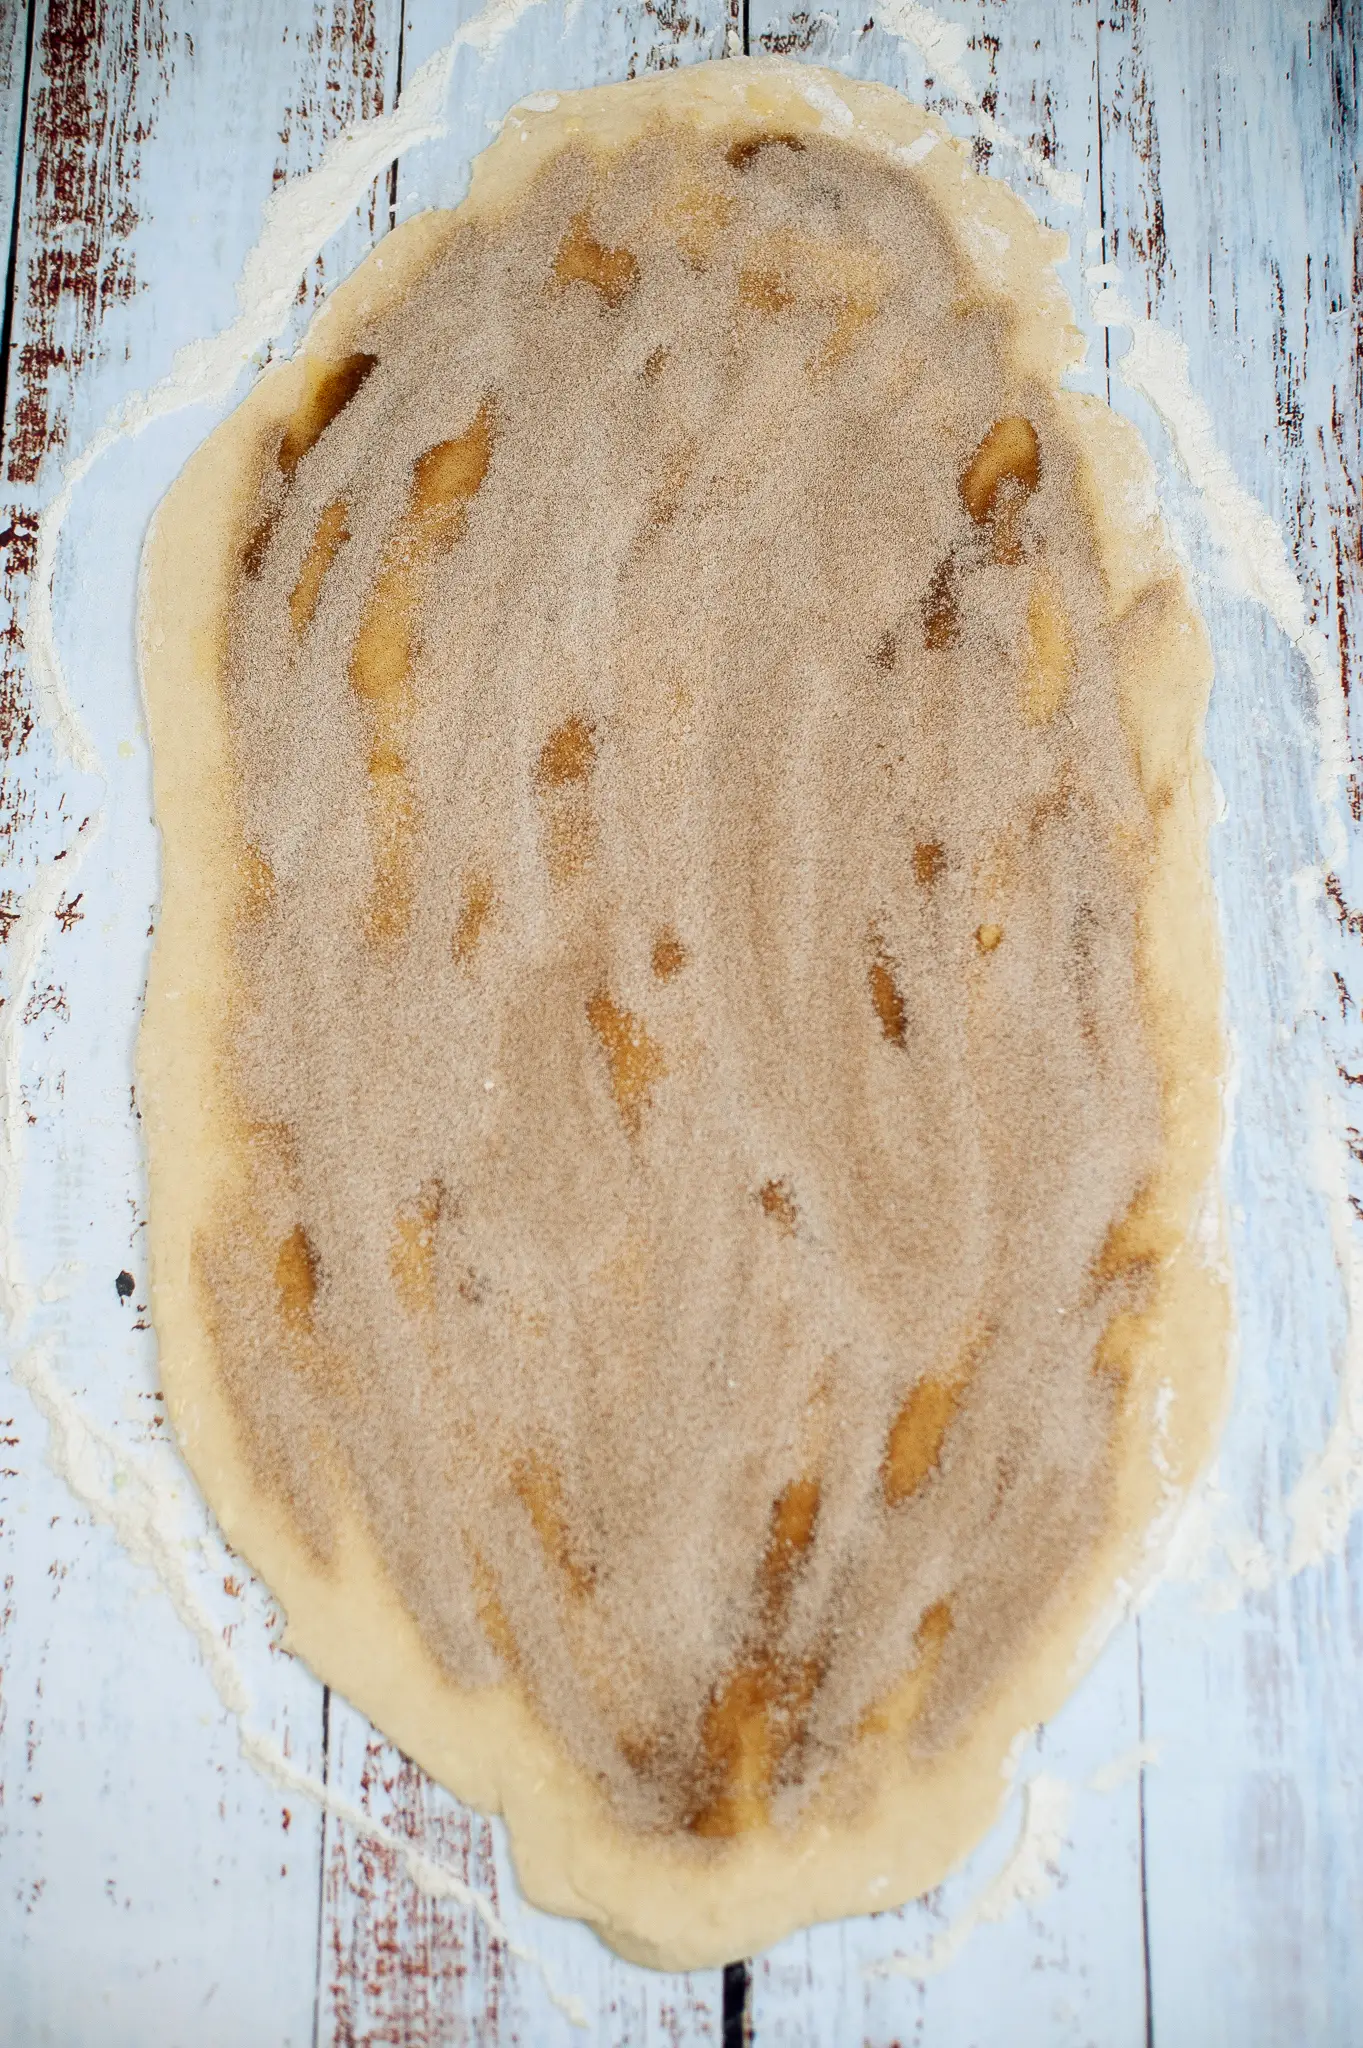 Butter, cinnamon and sugar filling added to cinnamon roll dough.